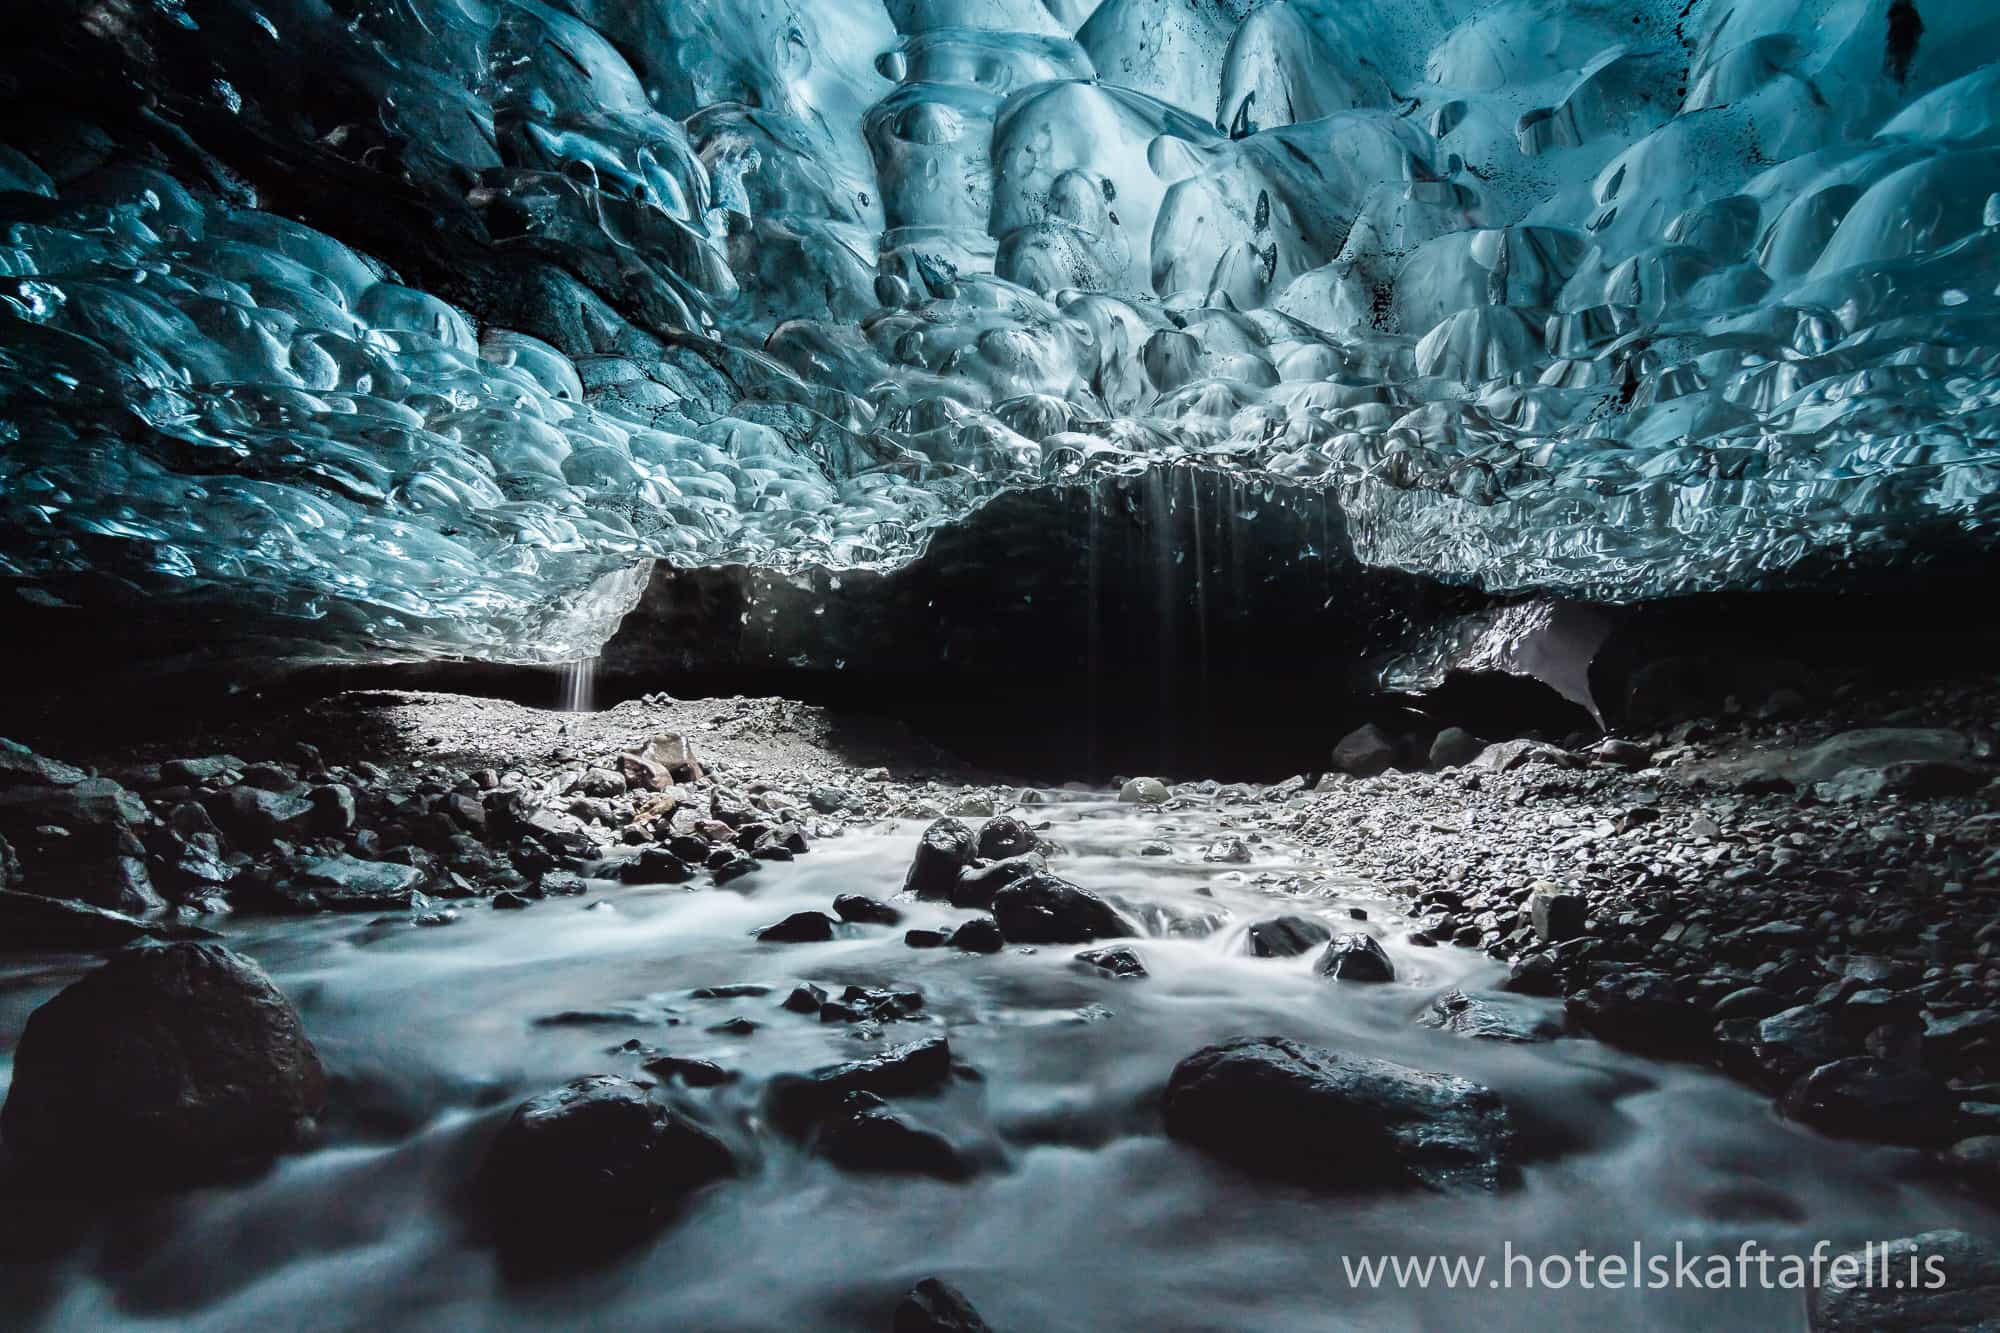 In the winter ice cave exploartion are popular close to Hotel Skaftafell